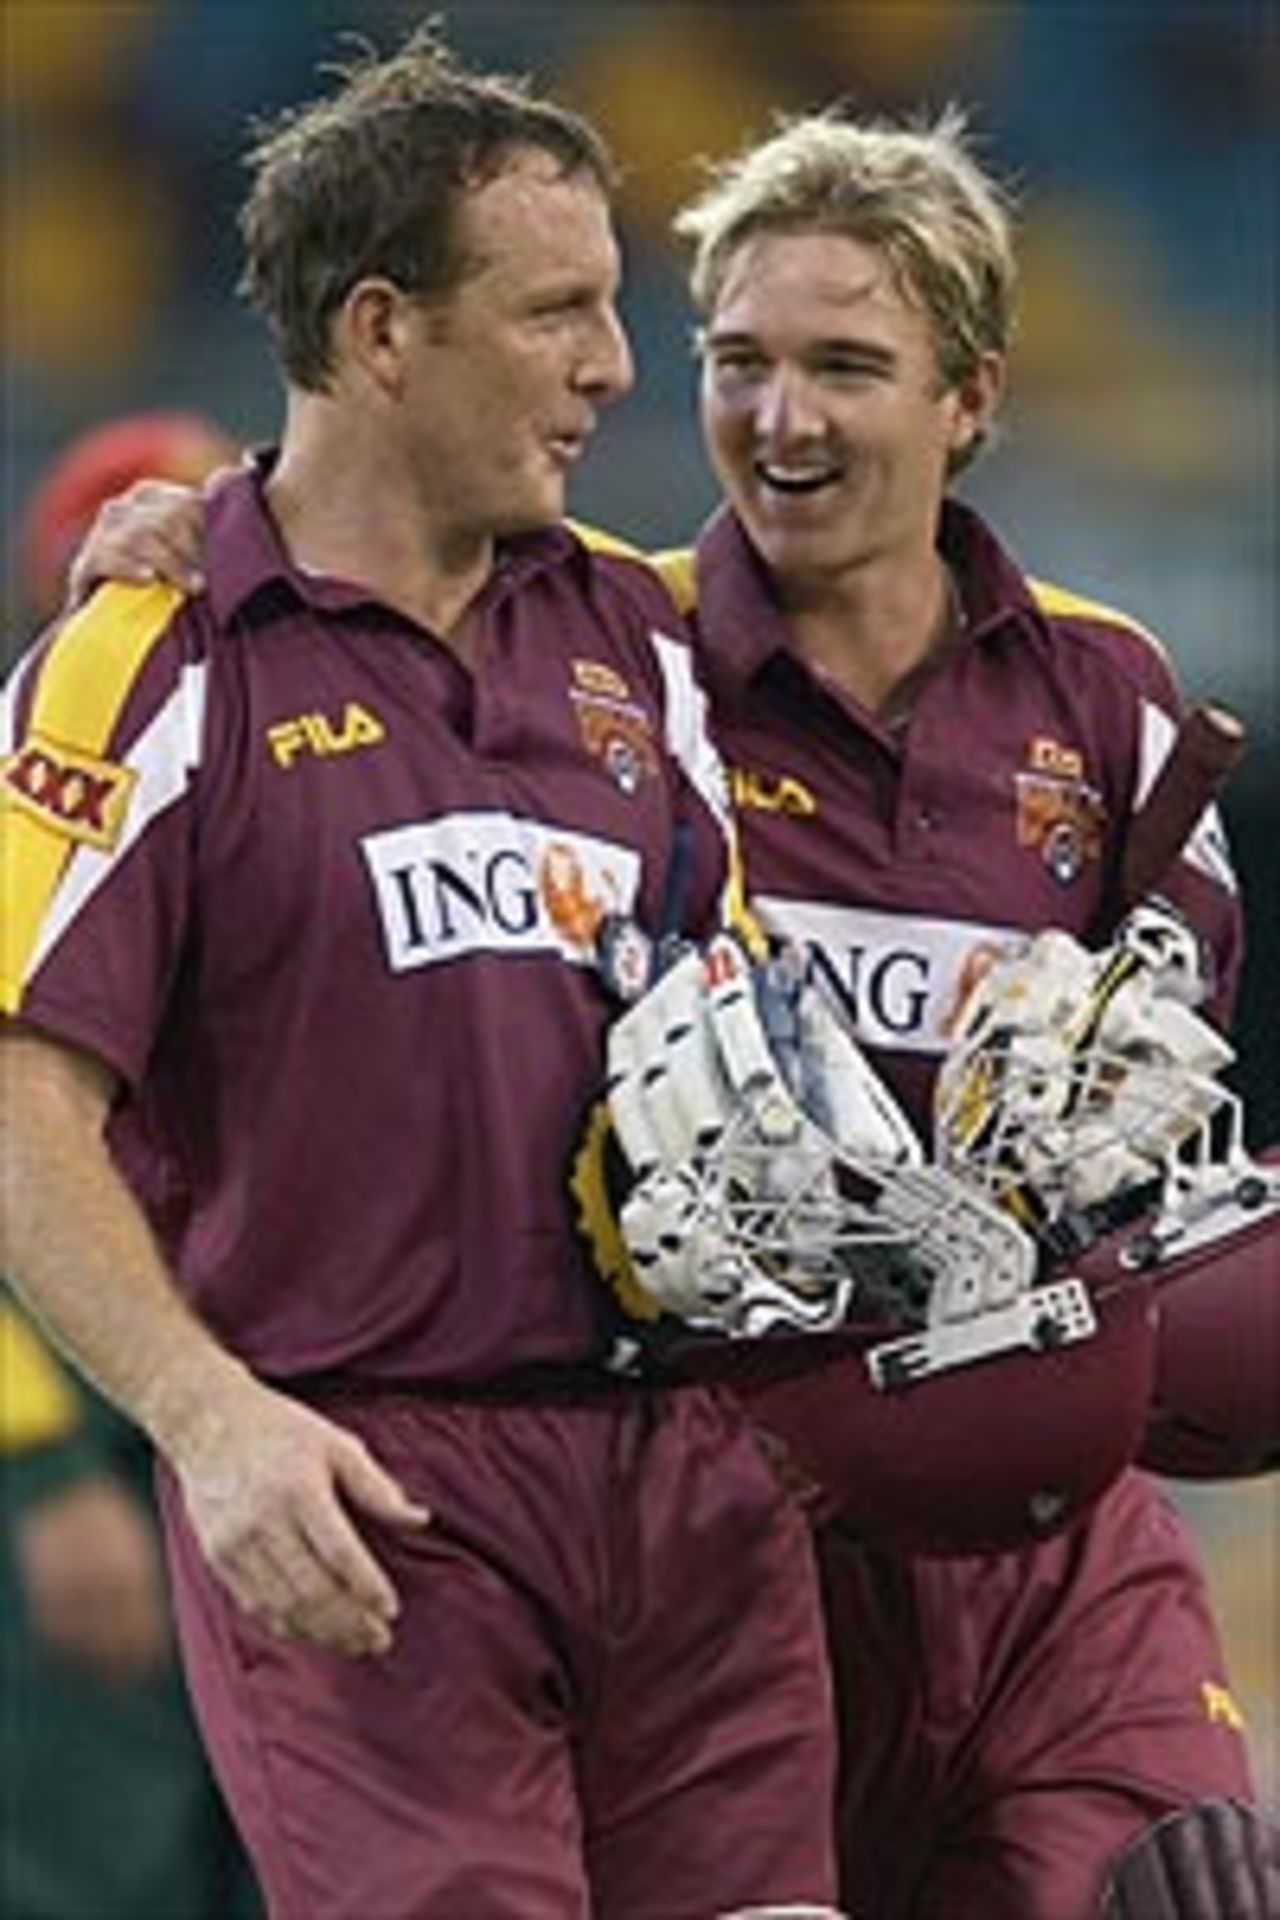 Wade Seccombe and Nathan Hauritz of the Bulls celebrate winning against the Tigers during the ING Cup match between the Queensland Bulls and the Tasmanian Tigers at the Gabba October 25, 2003 in Brisbane, Australia.